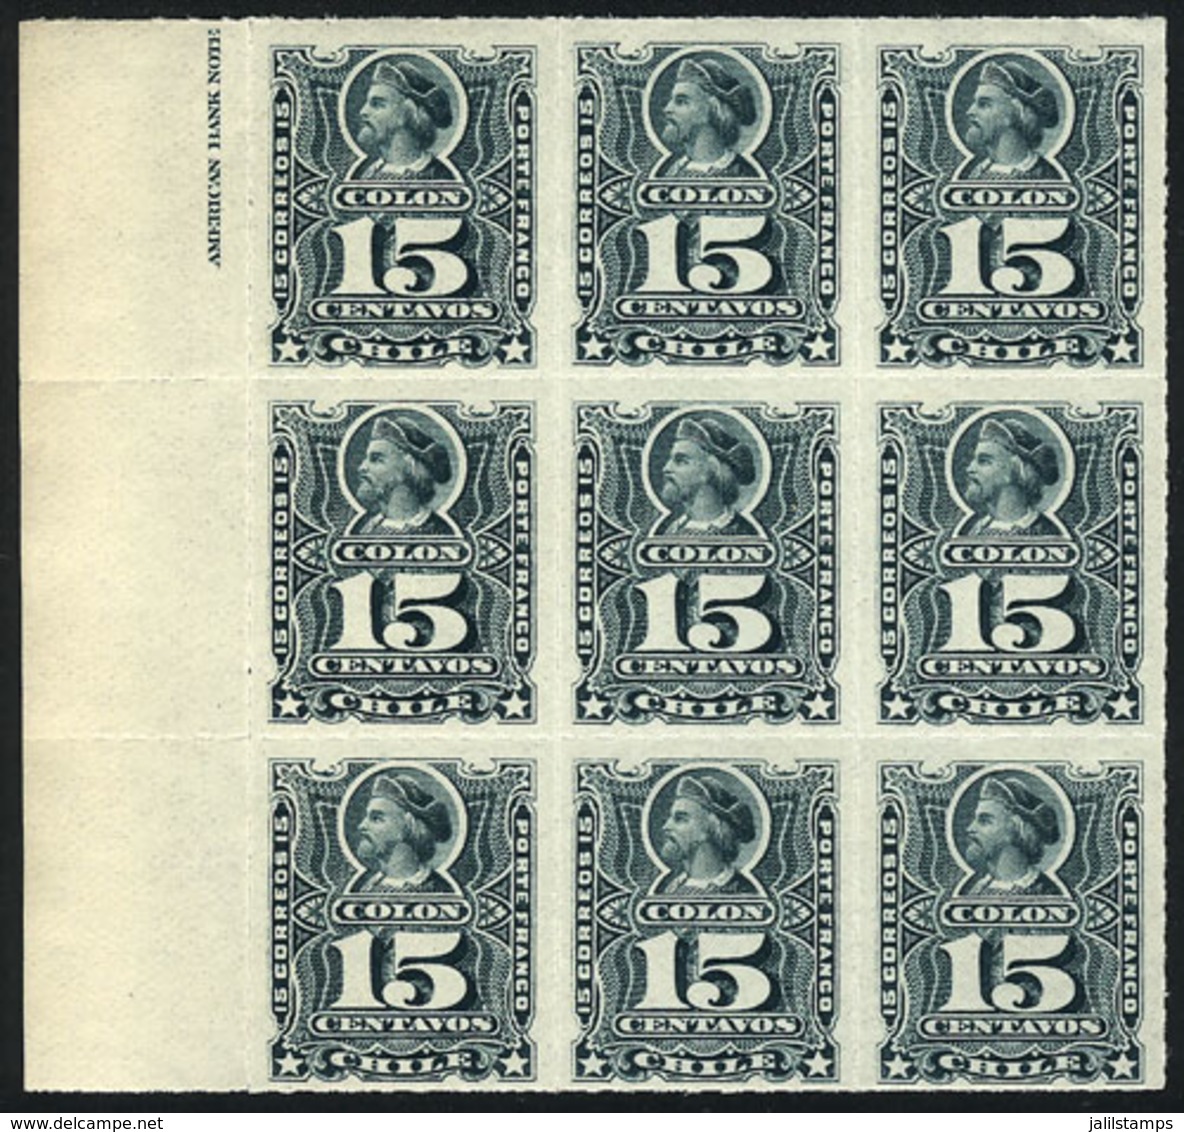 CHILE: Yv.26 (Sc.30), Fantastic Marginal Block Of 9, MNH, As Fresh As The Day It Was Printed, Superb! - Chile